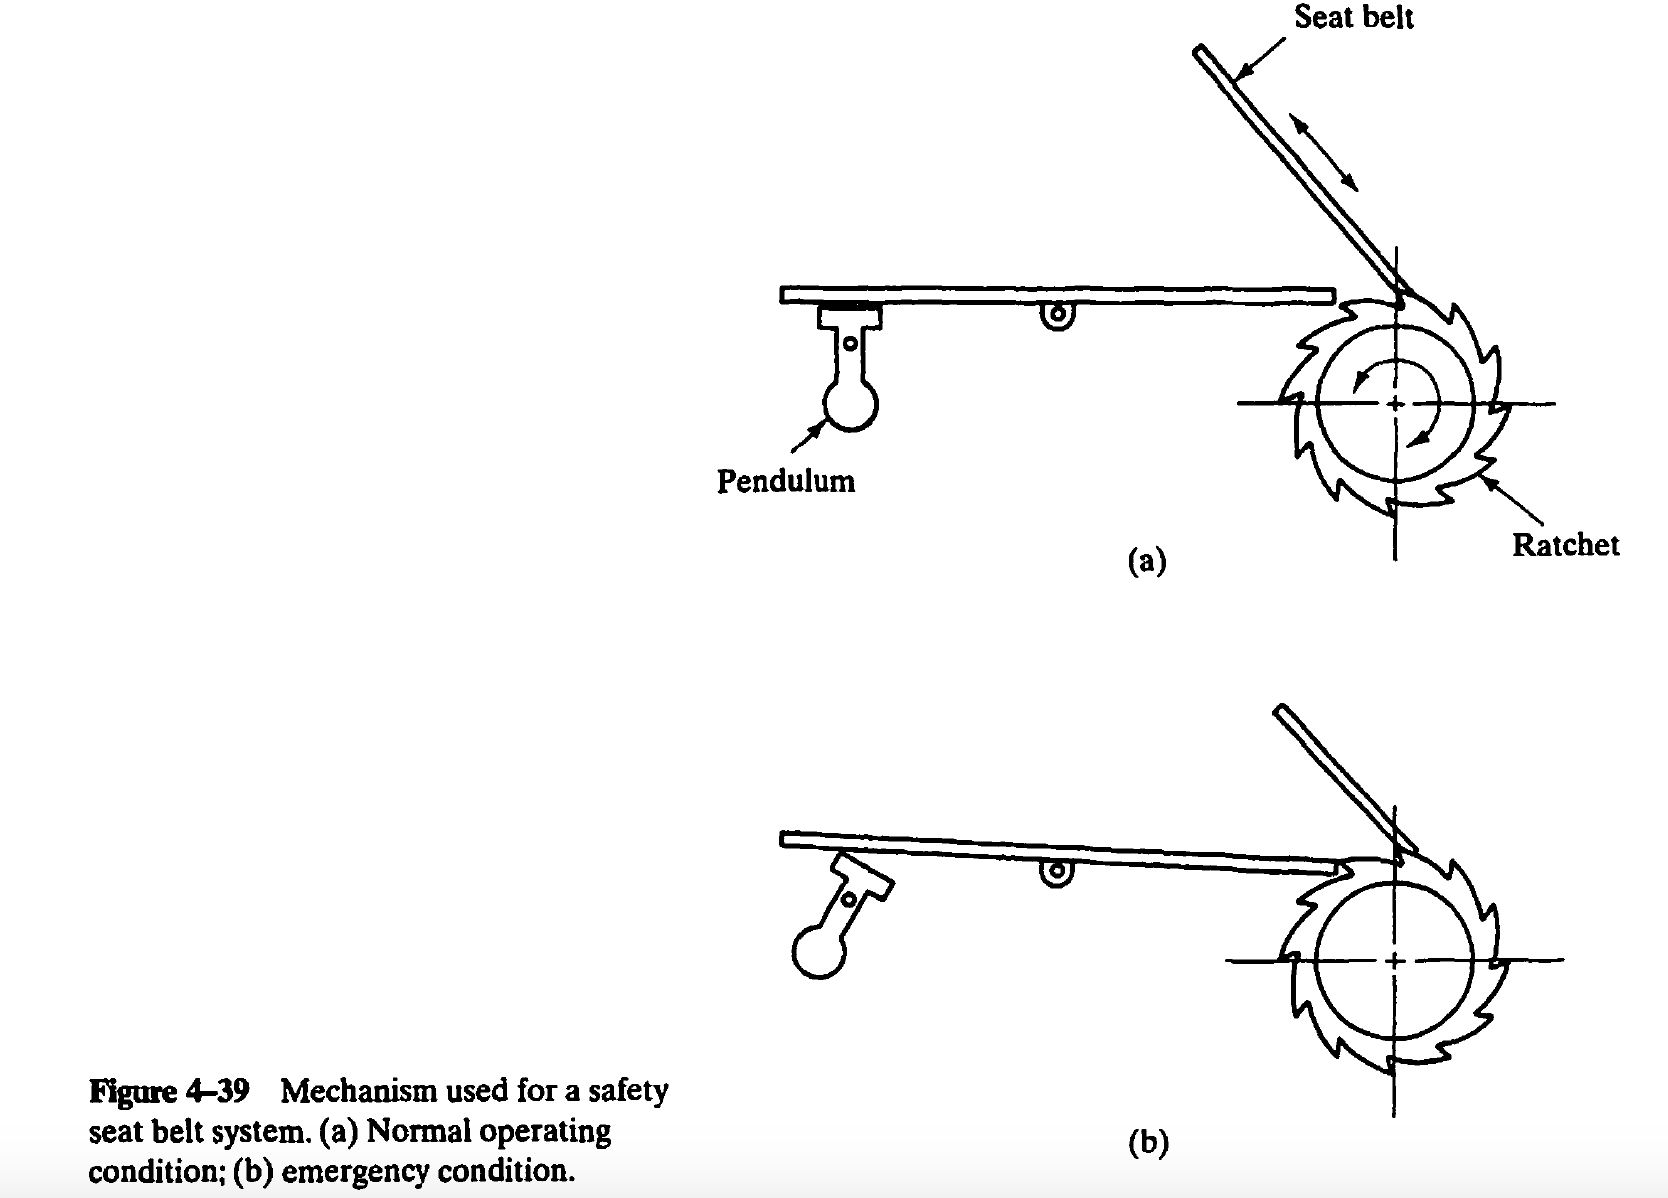 Figure 4-39 shows a mechanism used for a safety seat | Chegg.com